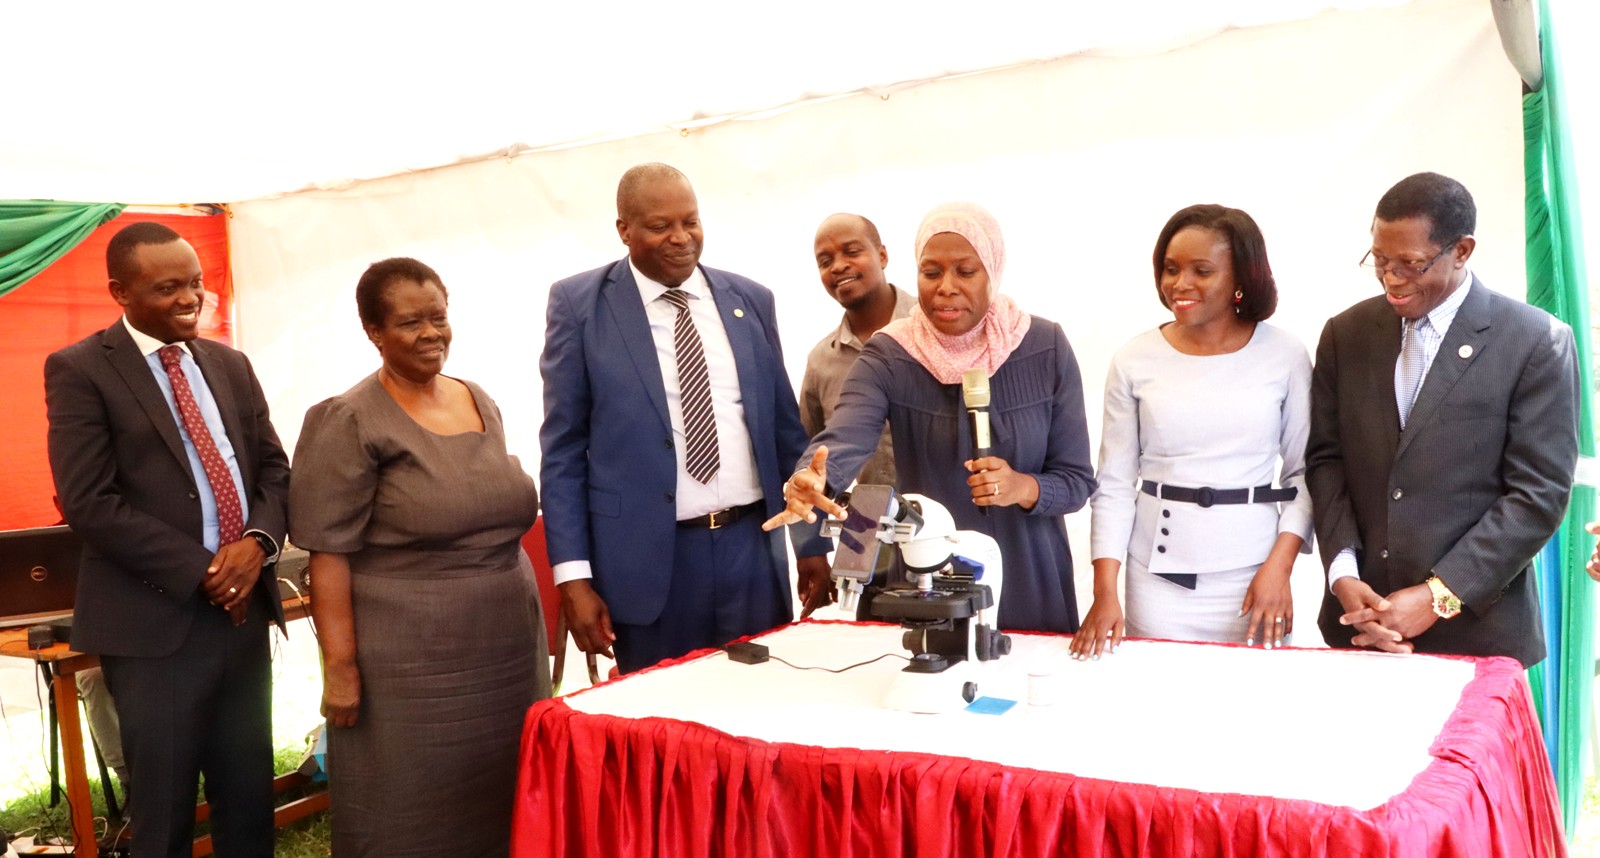 Permanent Secretary, MoICT & NG, Dr. Aminah Zawedde (3rd Right) flanked by Prof. Tonny Oyana (3rd Left) and the PI-Dr. Rose Nakasi Kiire (2nd Right) launches the Mak Ocular innovation on 13th September 2023 at CoCIS. Left to Right are Mr. Galandi Tony Kiire, Mrs. Elizbeth Gabona, Prof. Buyinza Mukadasi and a MakSPH official (Rear). College of Computing and Information Sciences (CoCIS), Makerere University, Kampala Uganda, East Africa.